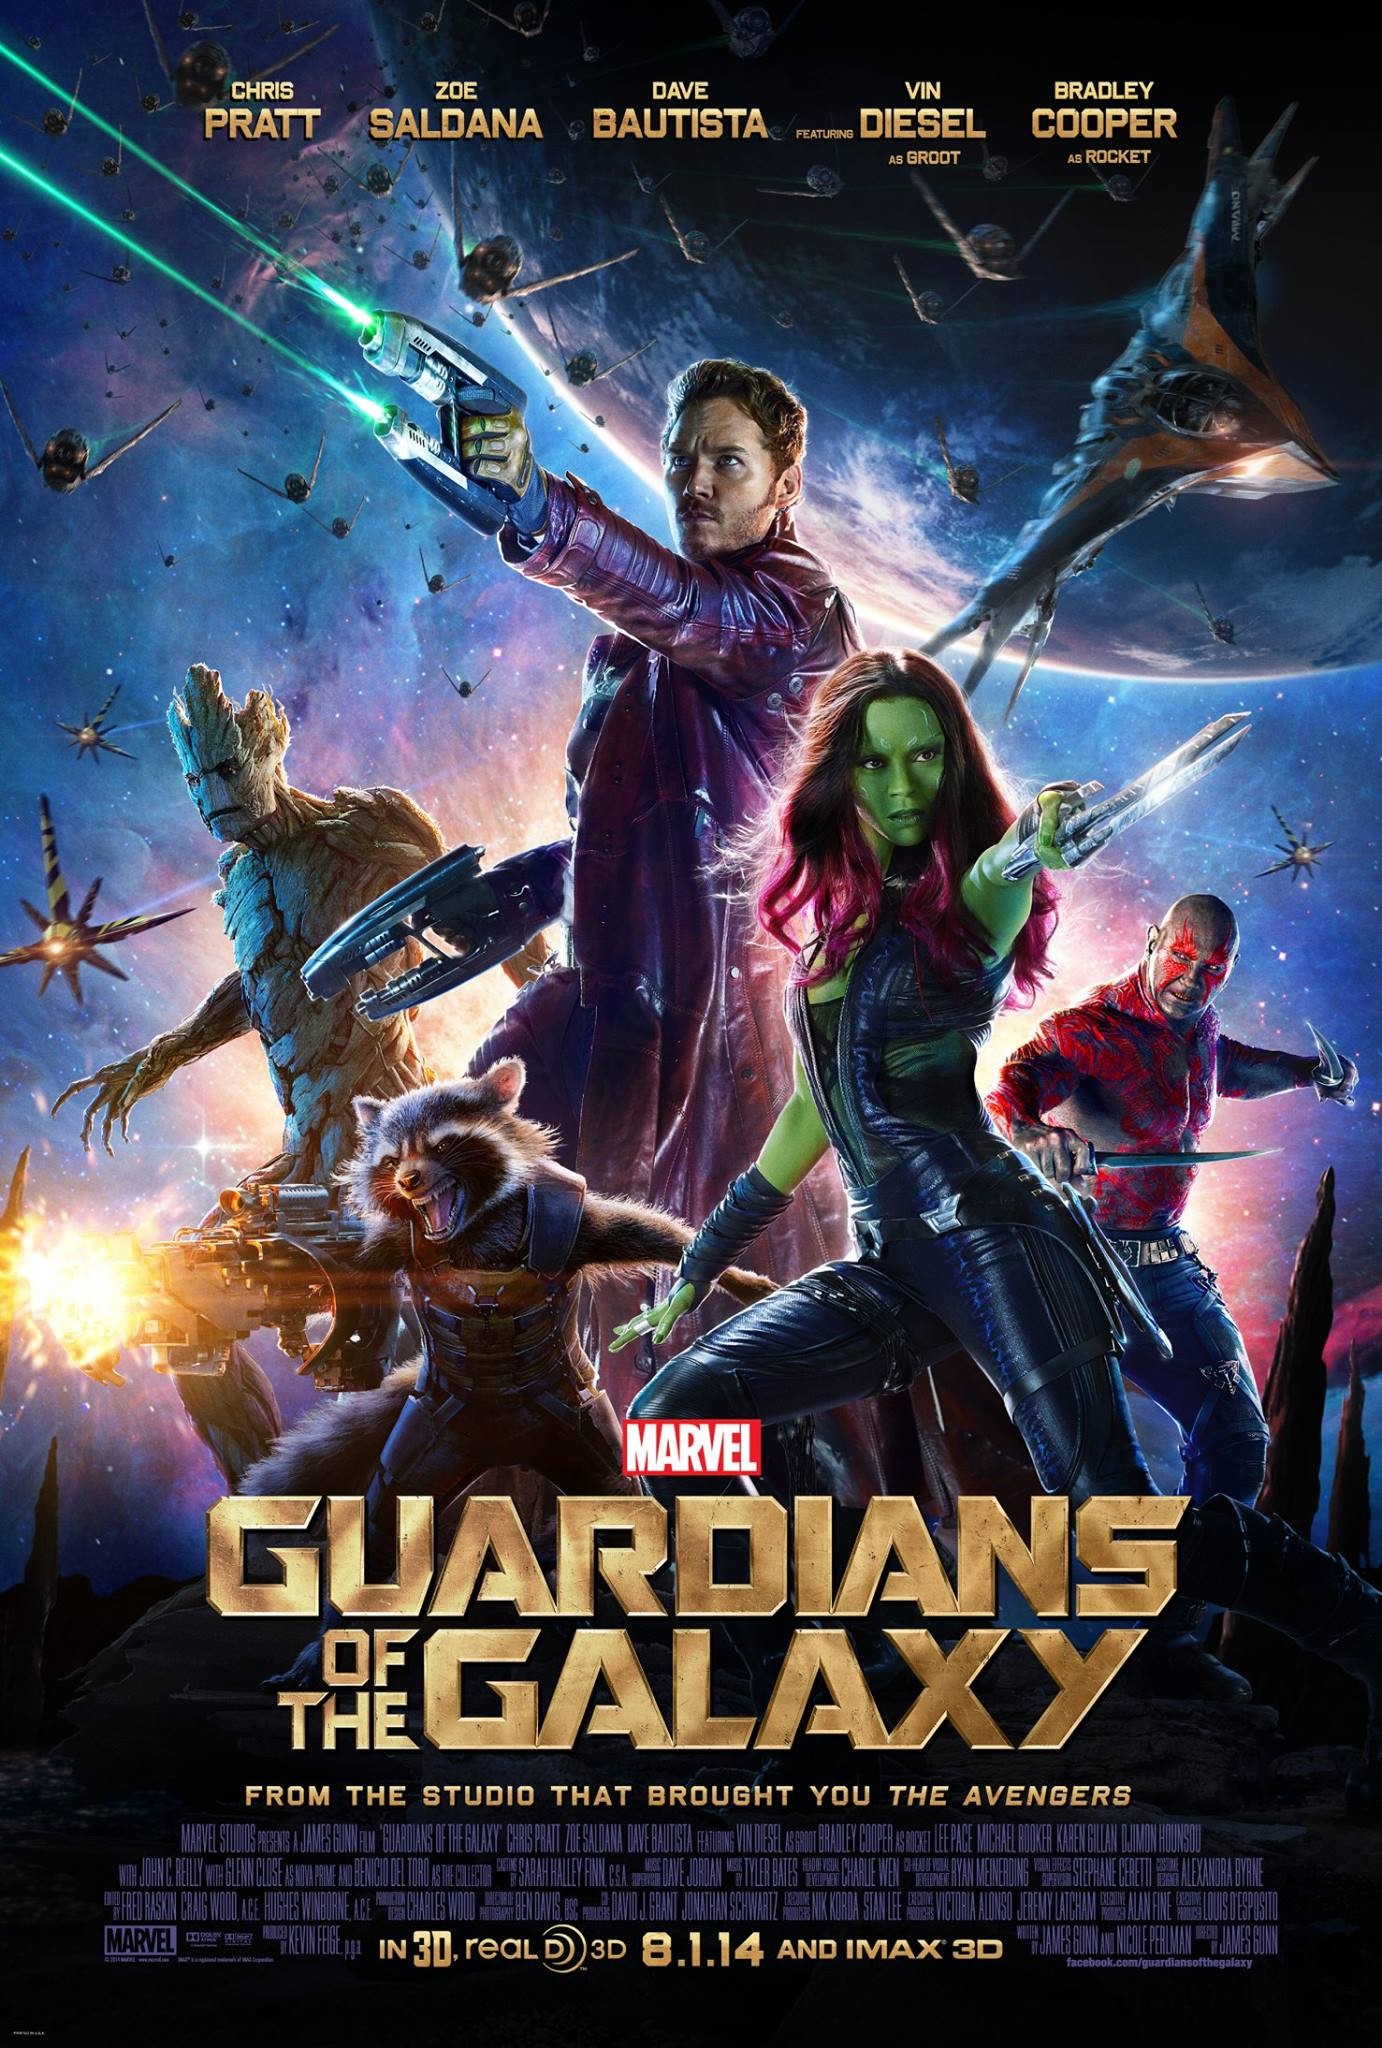 James Gunn explains a controversial plot-hole in 'Guardians of the